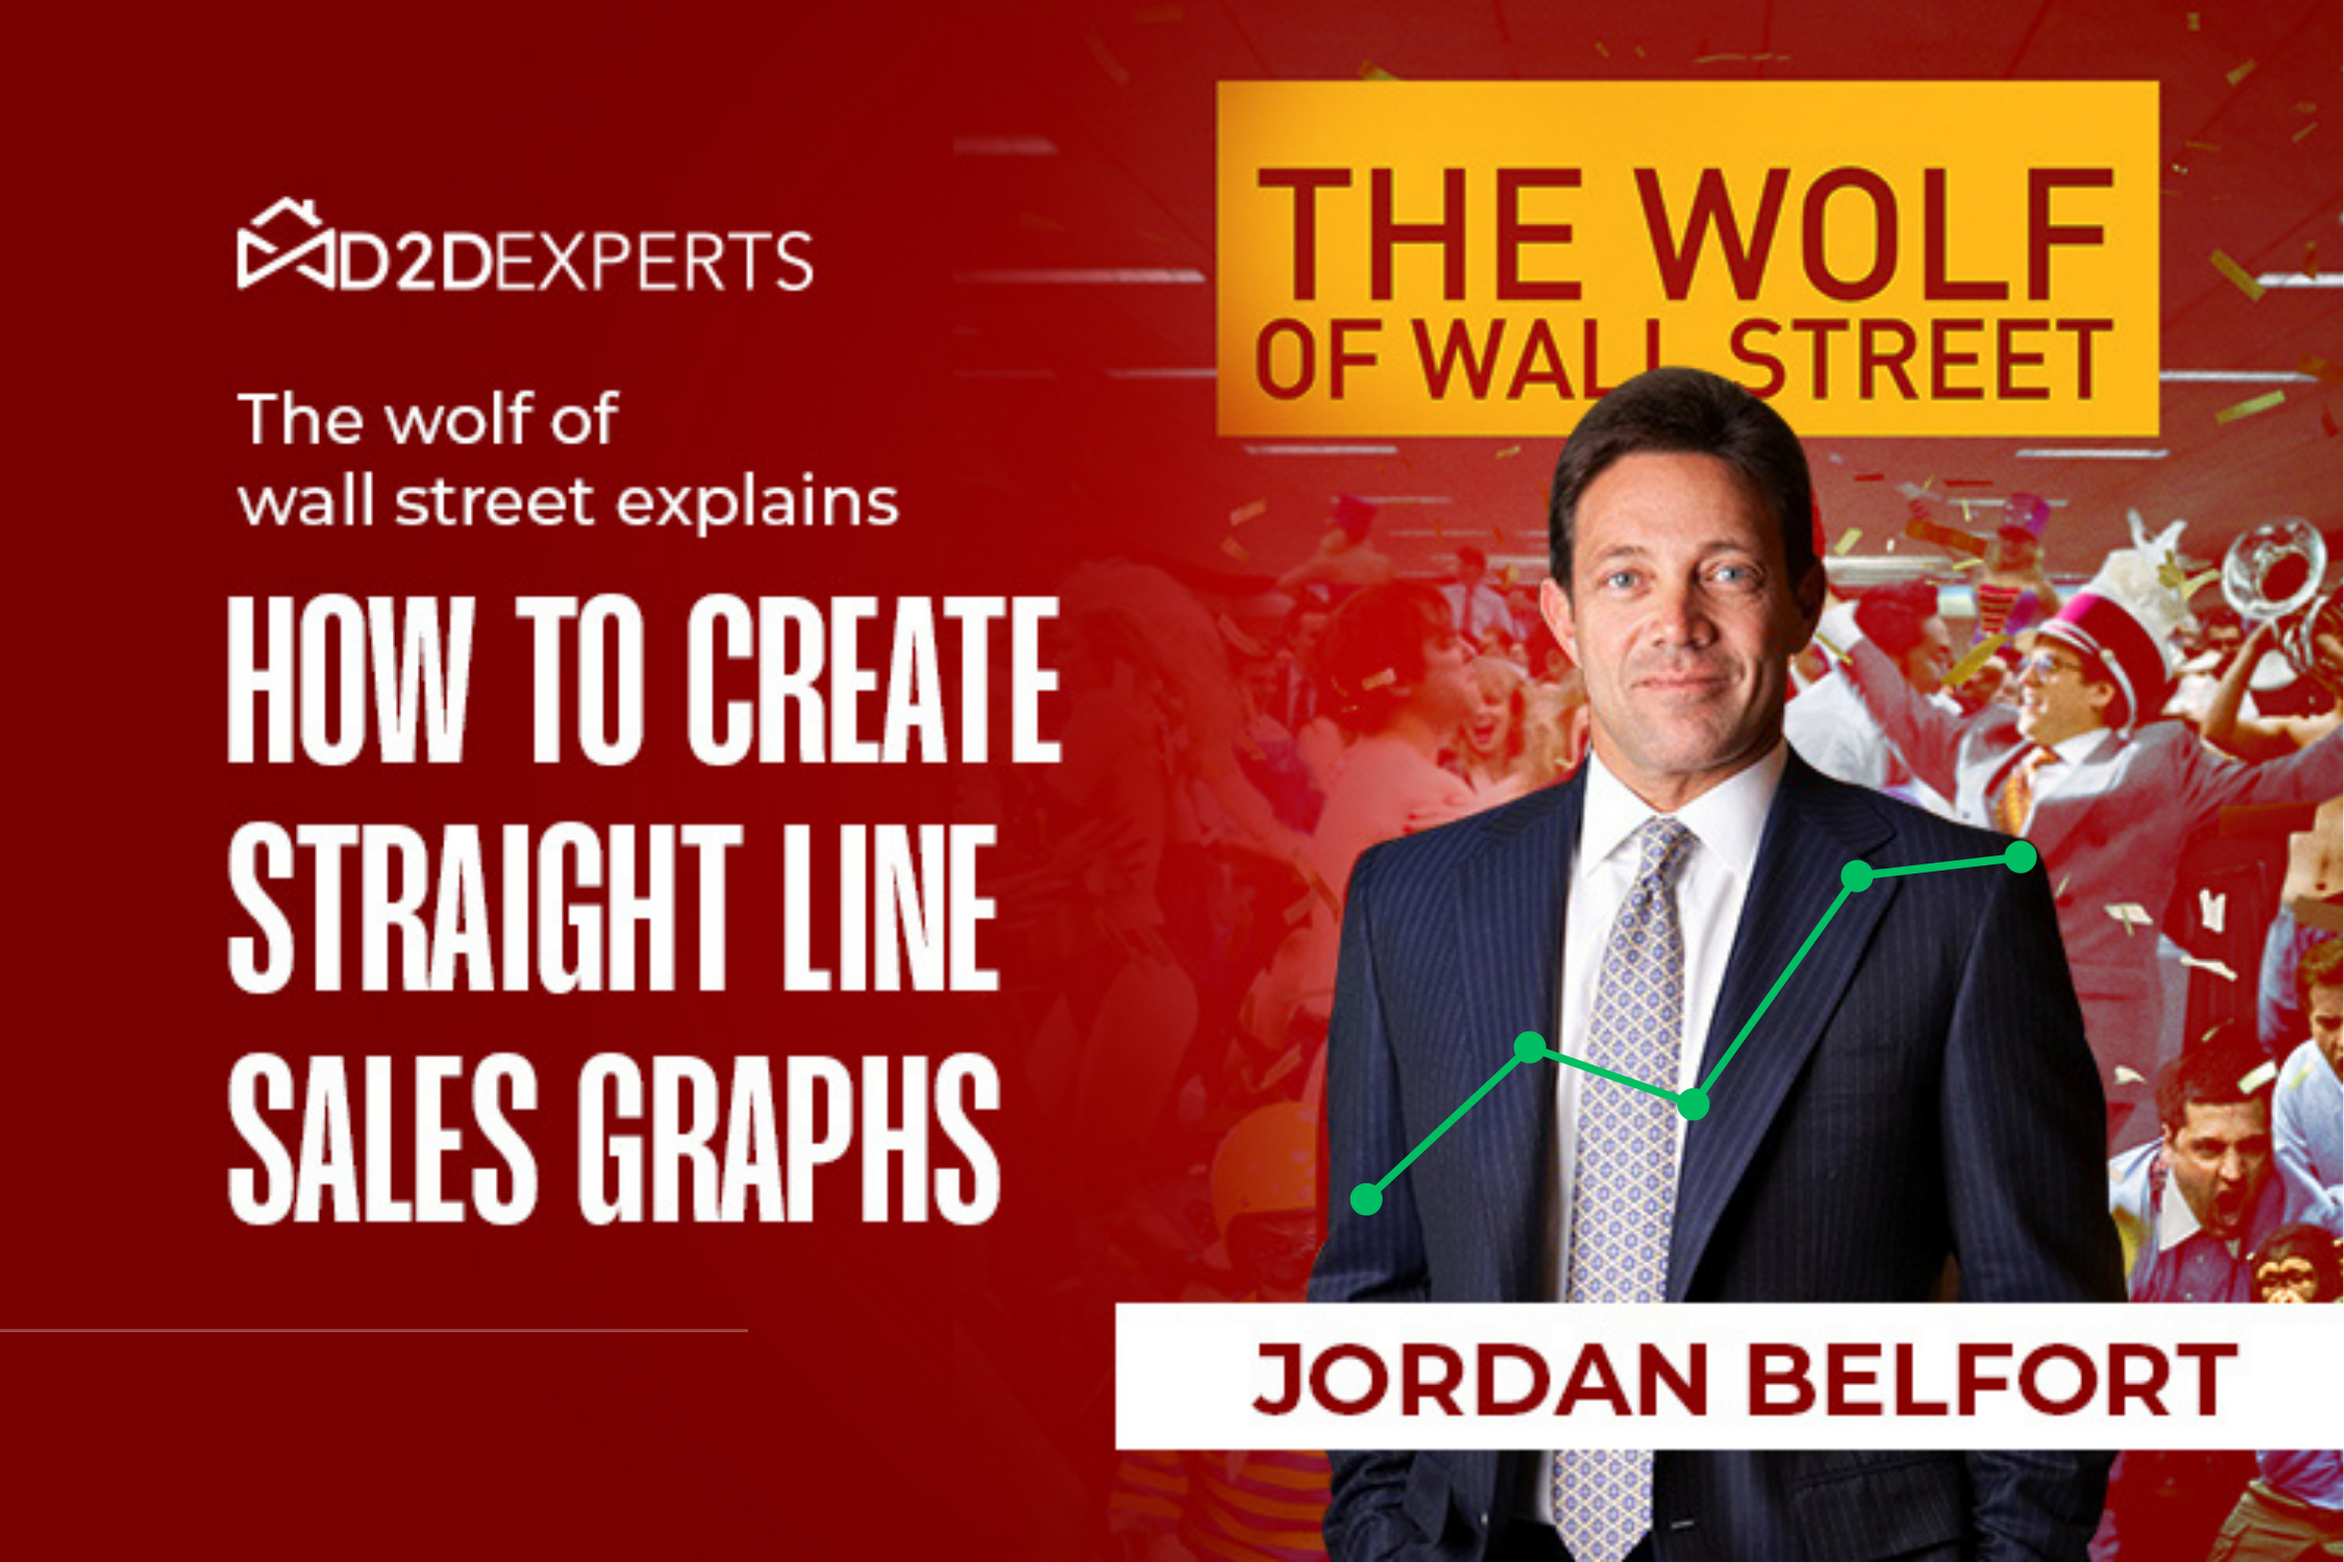 Jordan Belfort presenting his Straight Line Selling strategies with a backdrop of cheering crowd and the title 'The Wolf of Wall Street'.